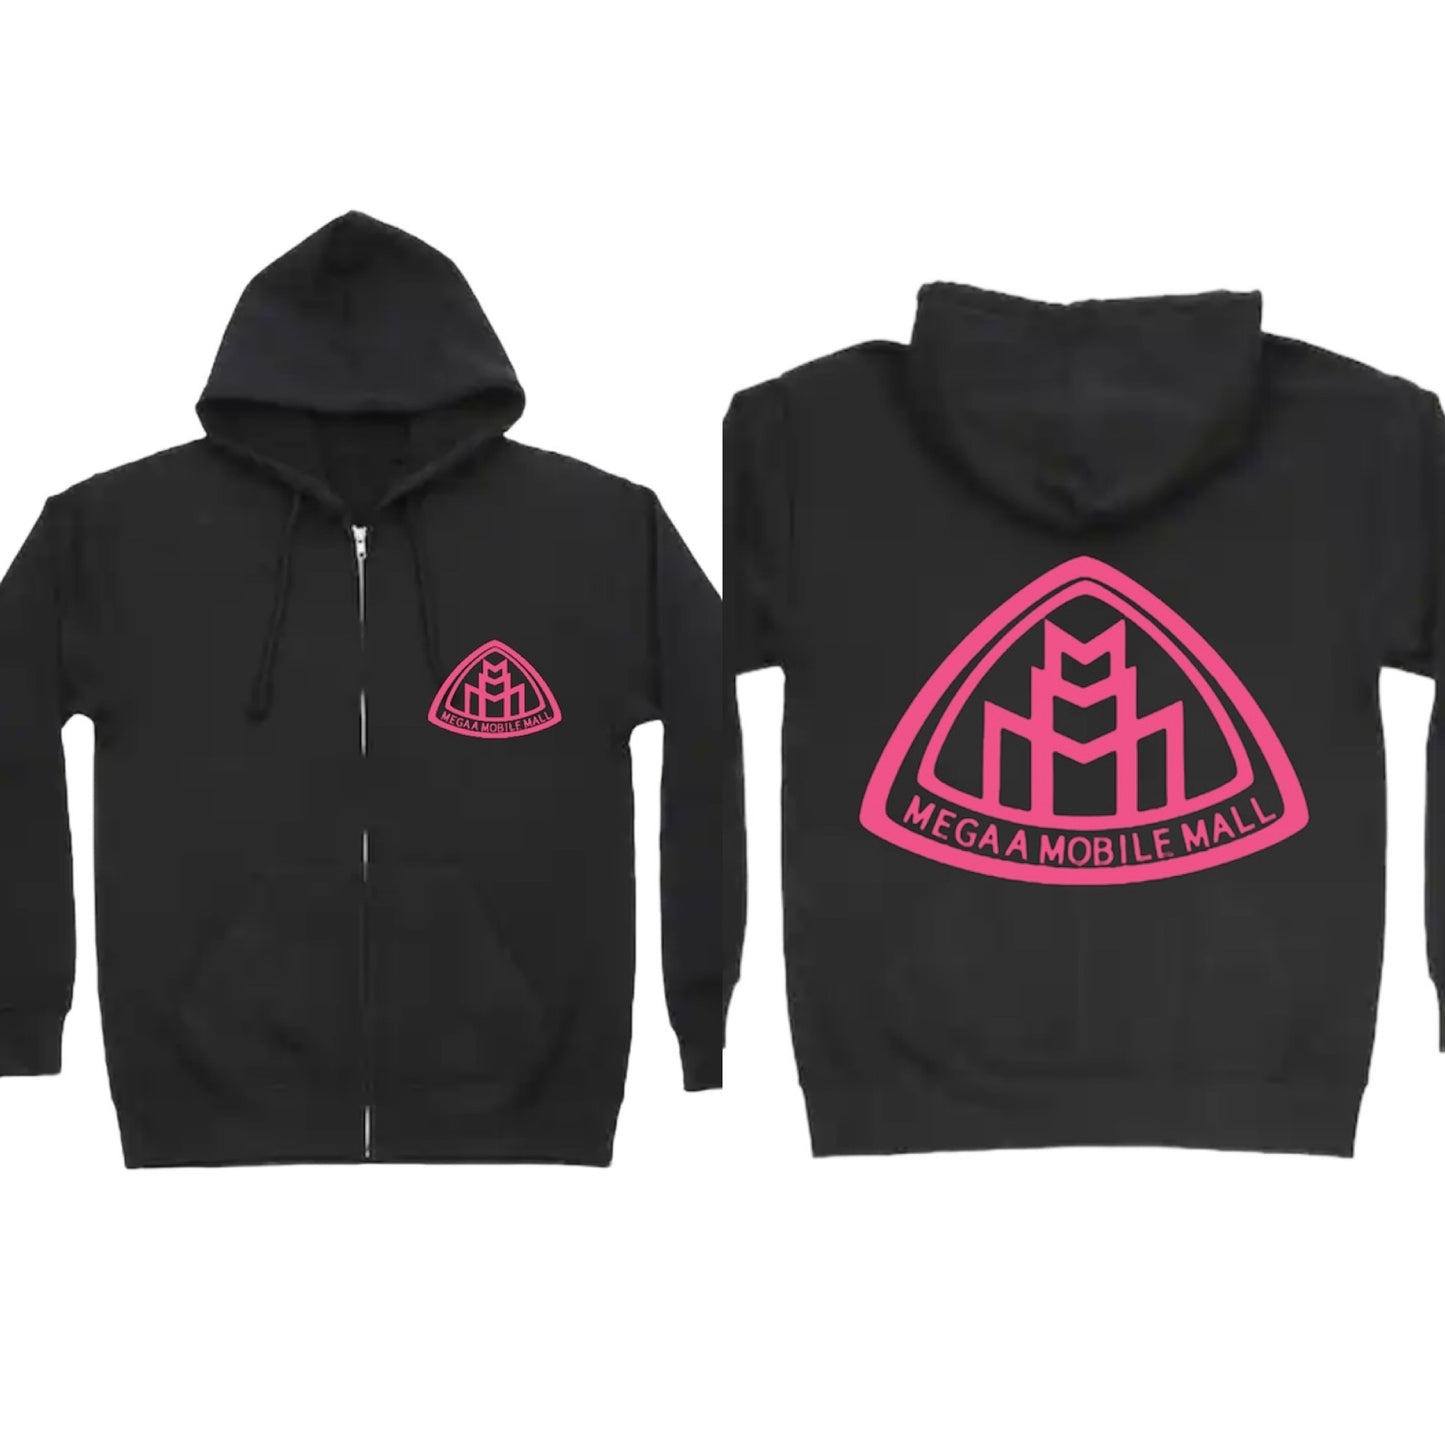 megaamobilemall black zip up hoodie with pink logo color